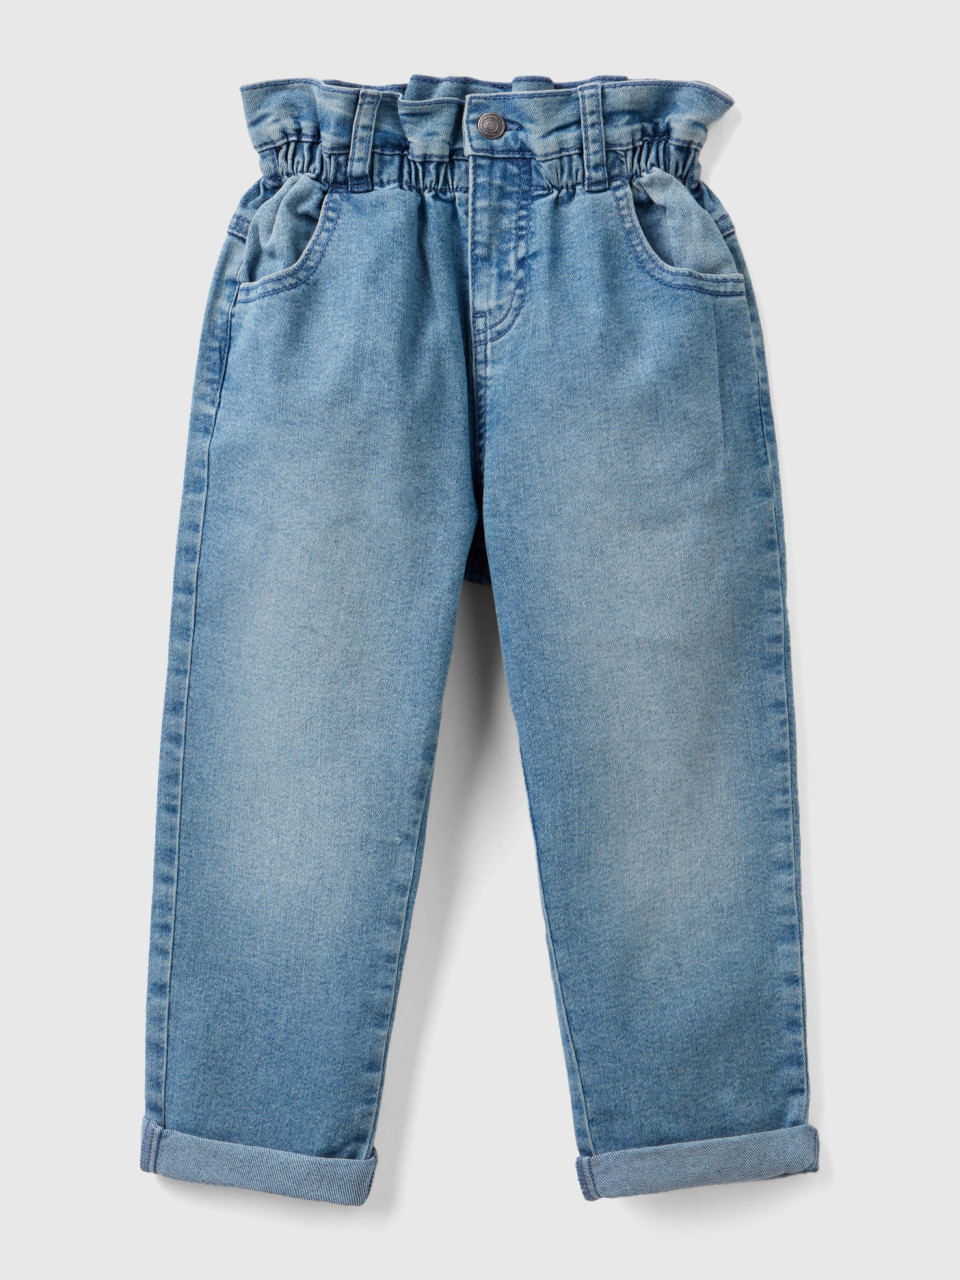 Benetton, eco-recycle Paperbag Jeans, Light Blue, Kids